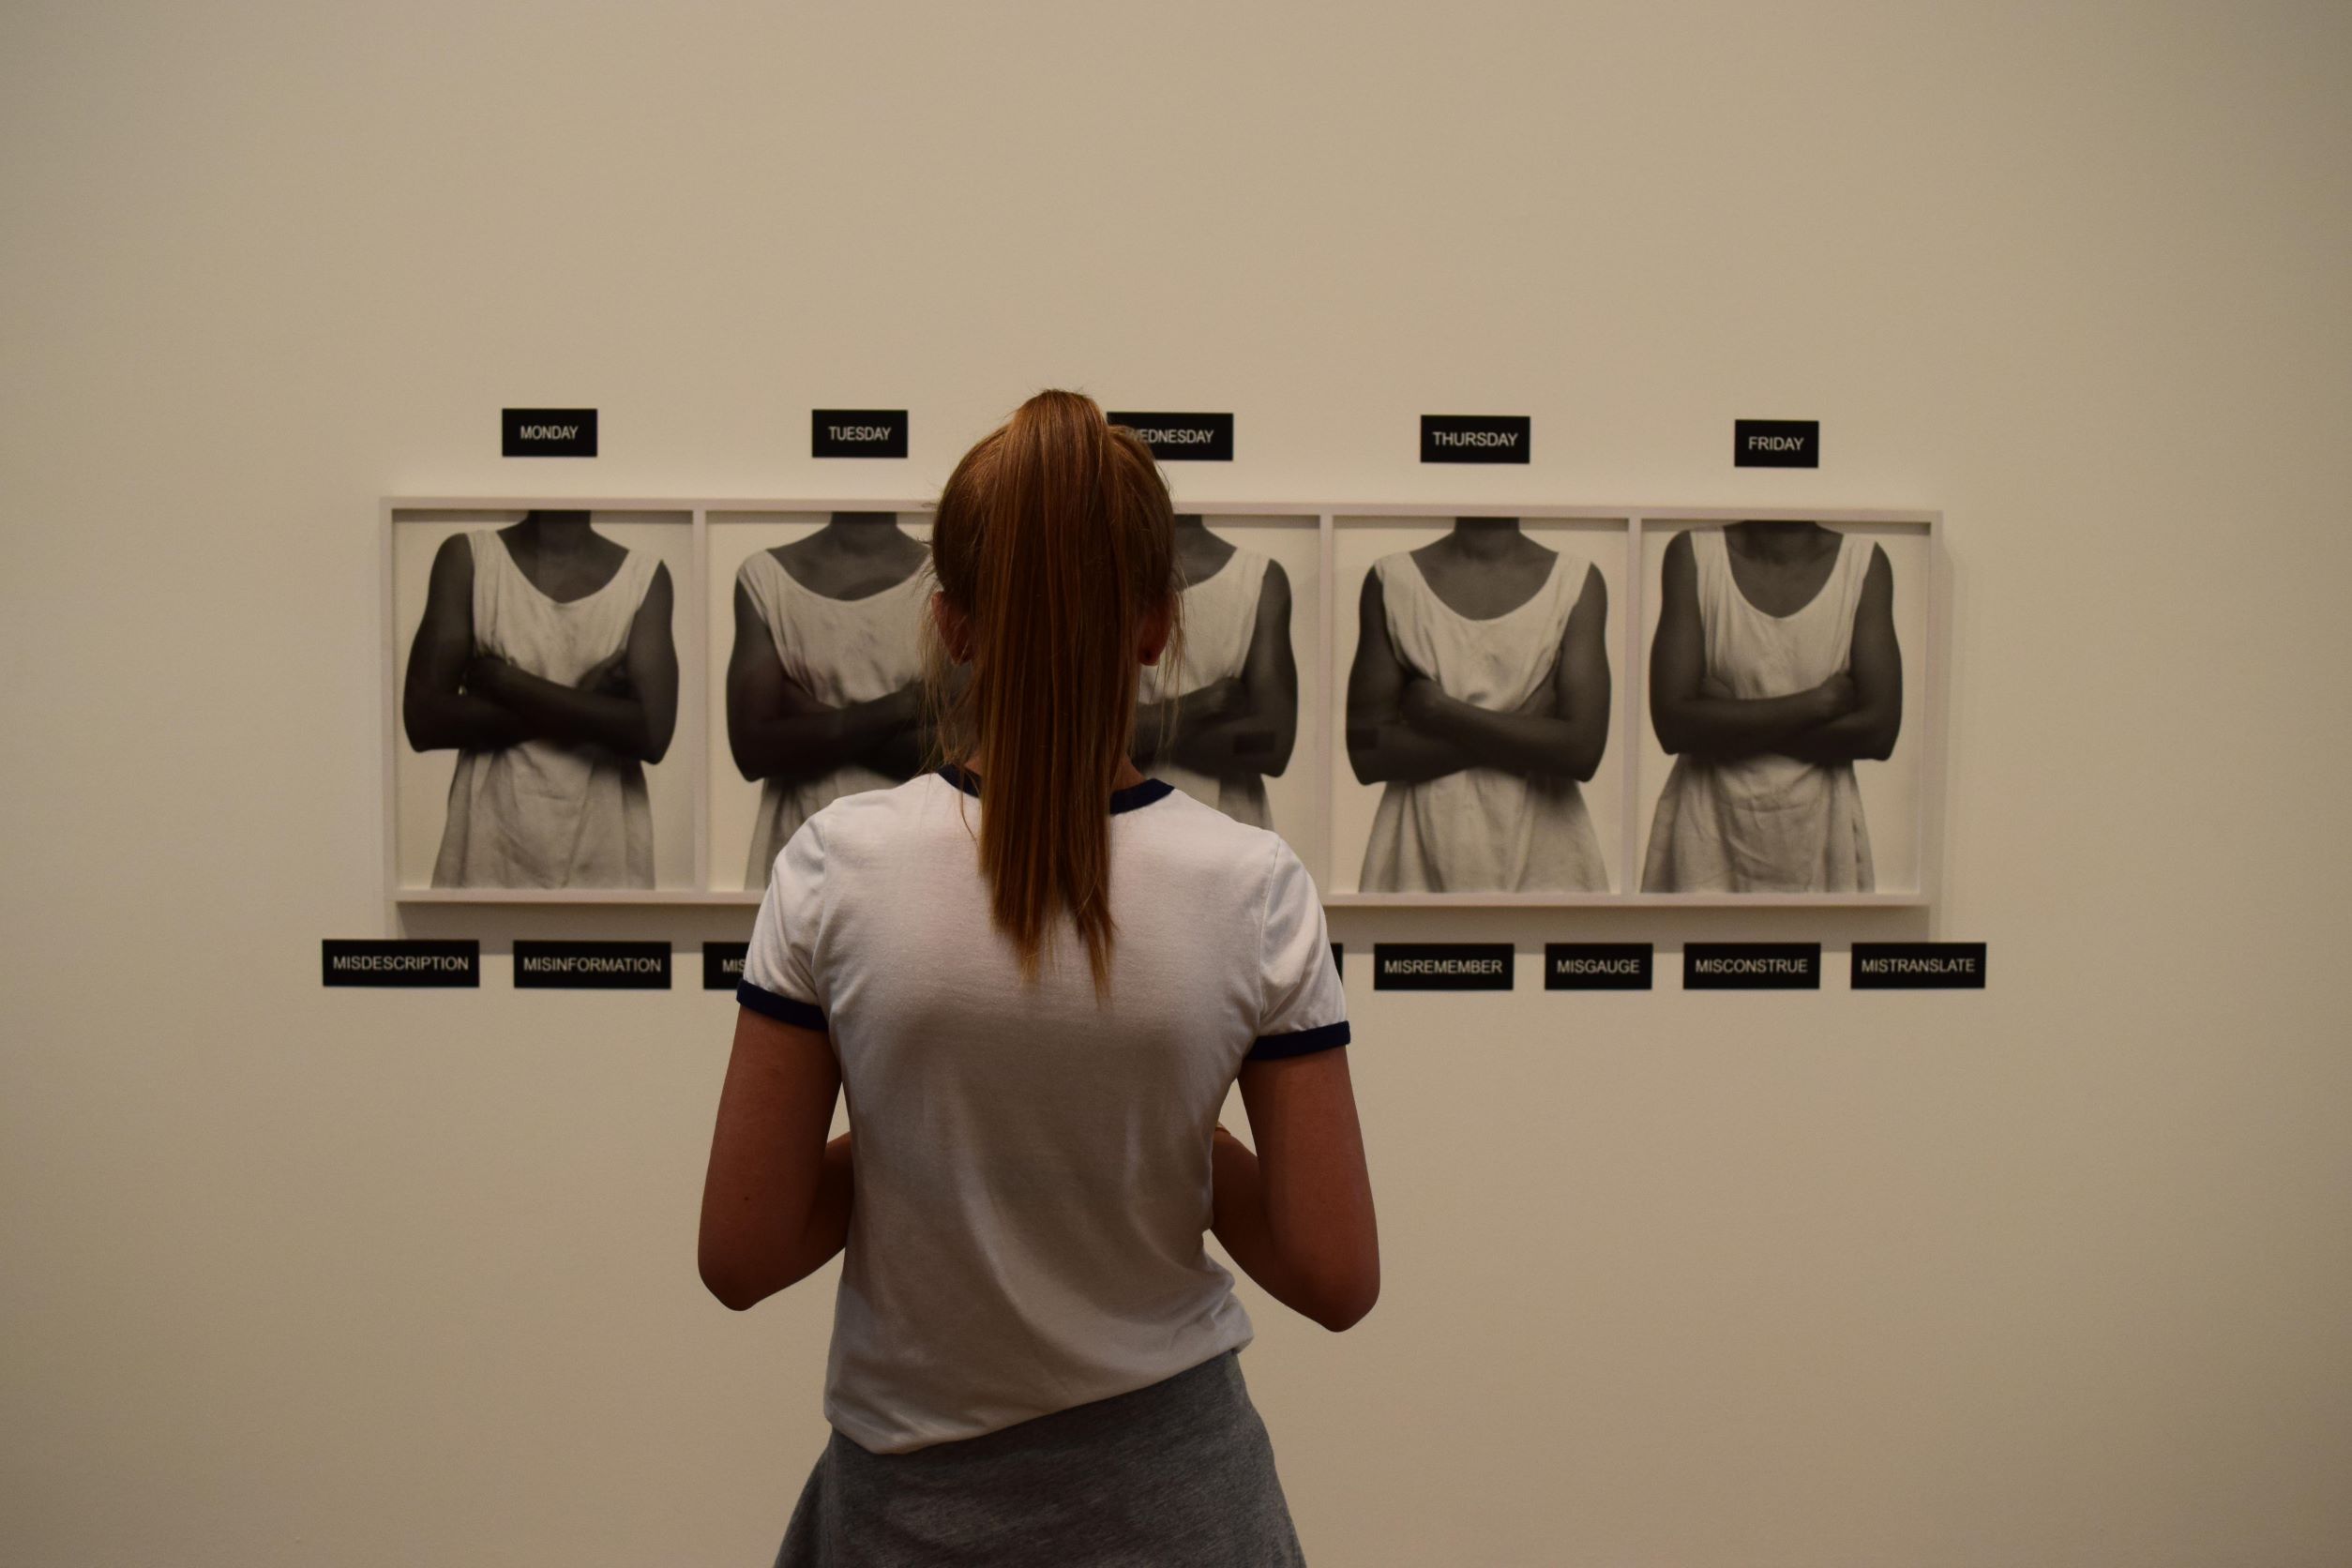 Young woman in white t-shirt looking at Five Day Forecast by Lorna Simpson at Tate Britain. Andrew Innes / Alamy Stock Photo